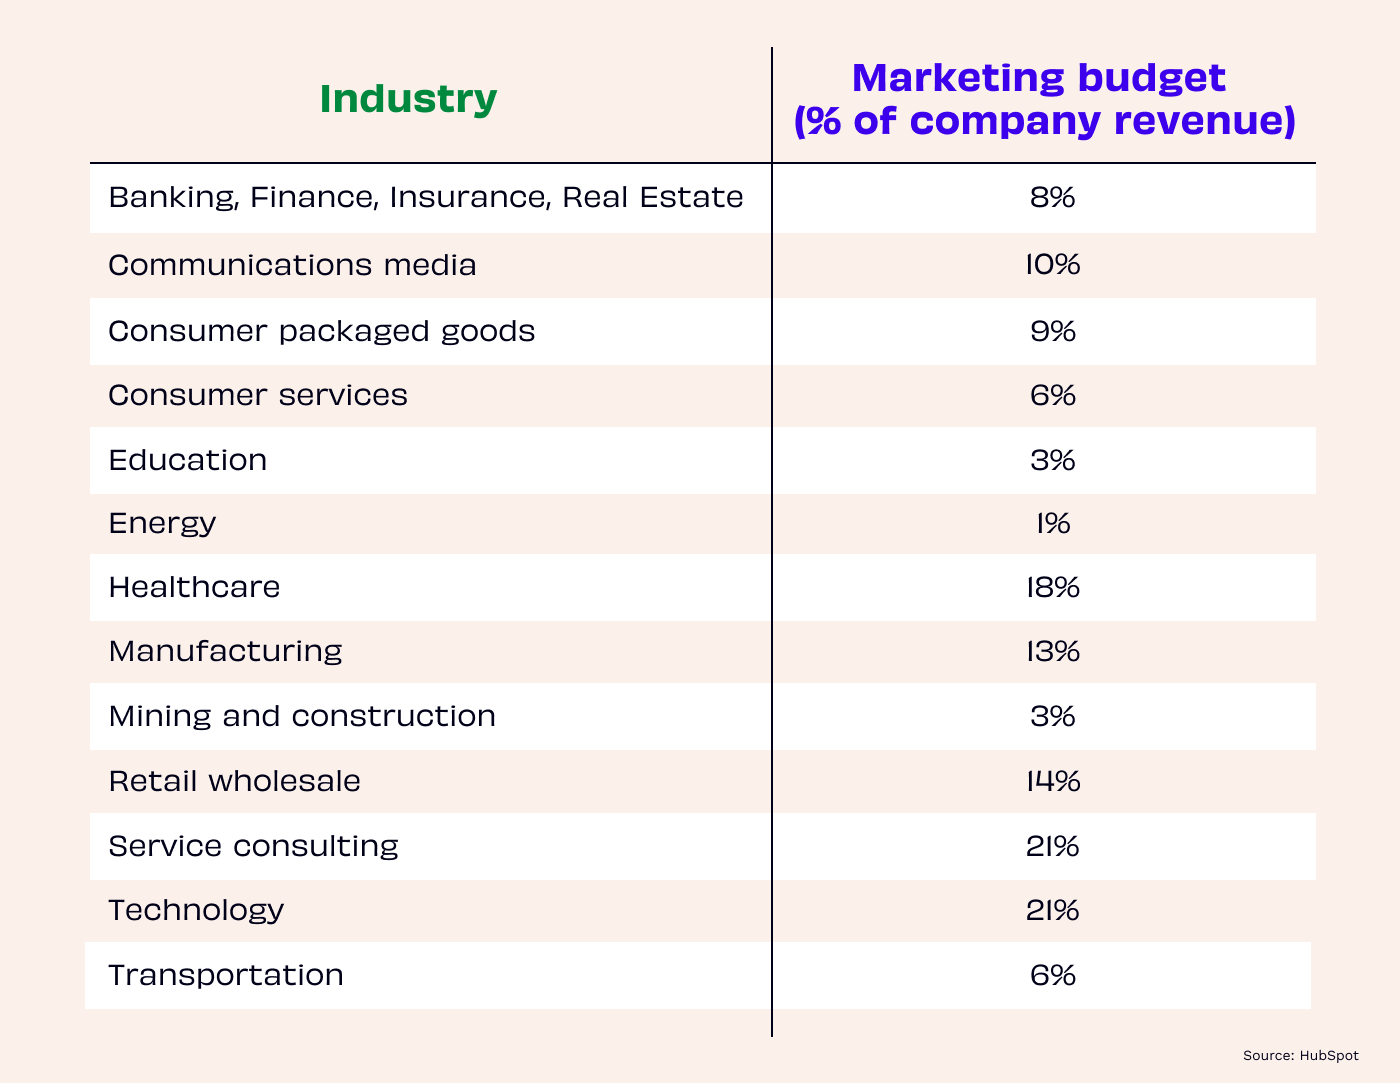 Table showing the marketing budget as a percentage of revenue by industry